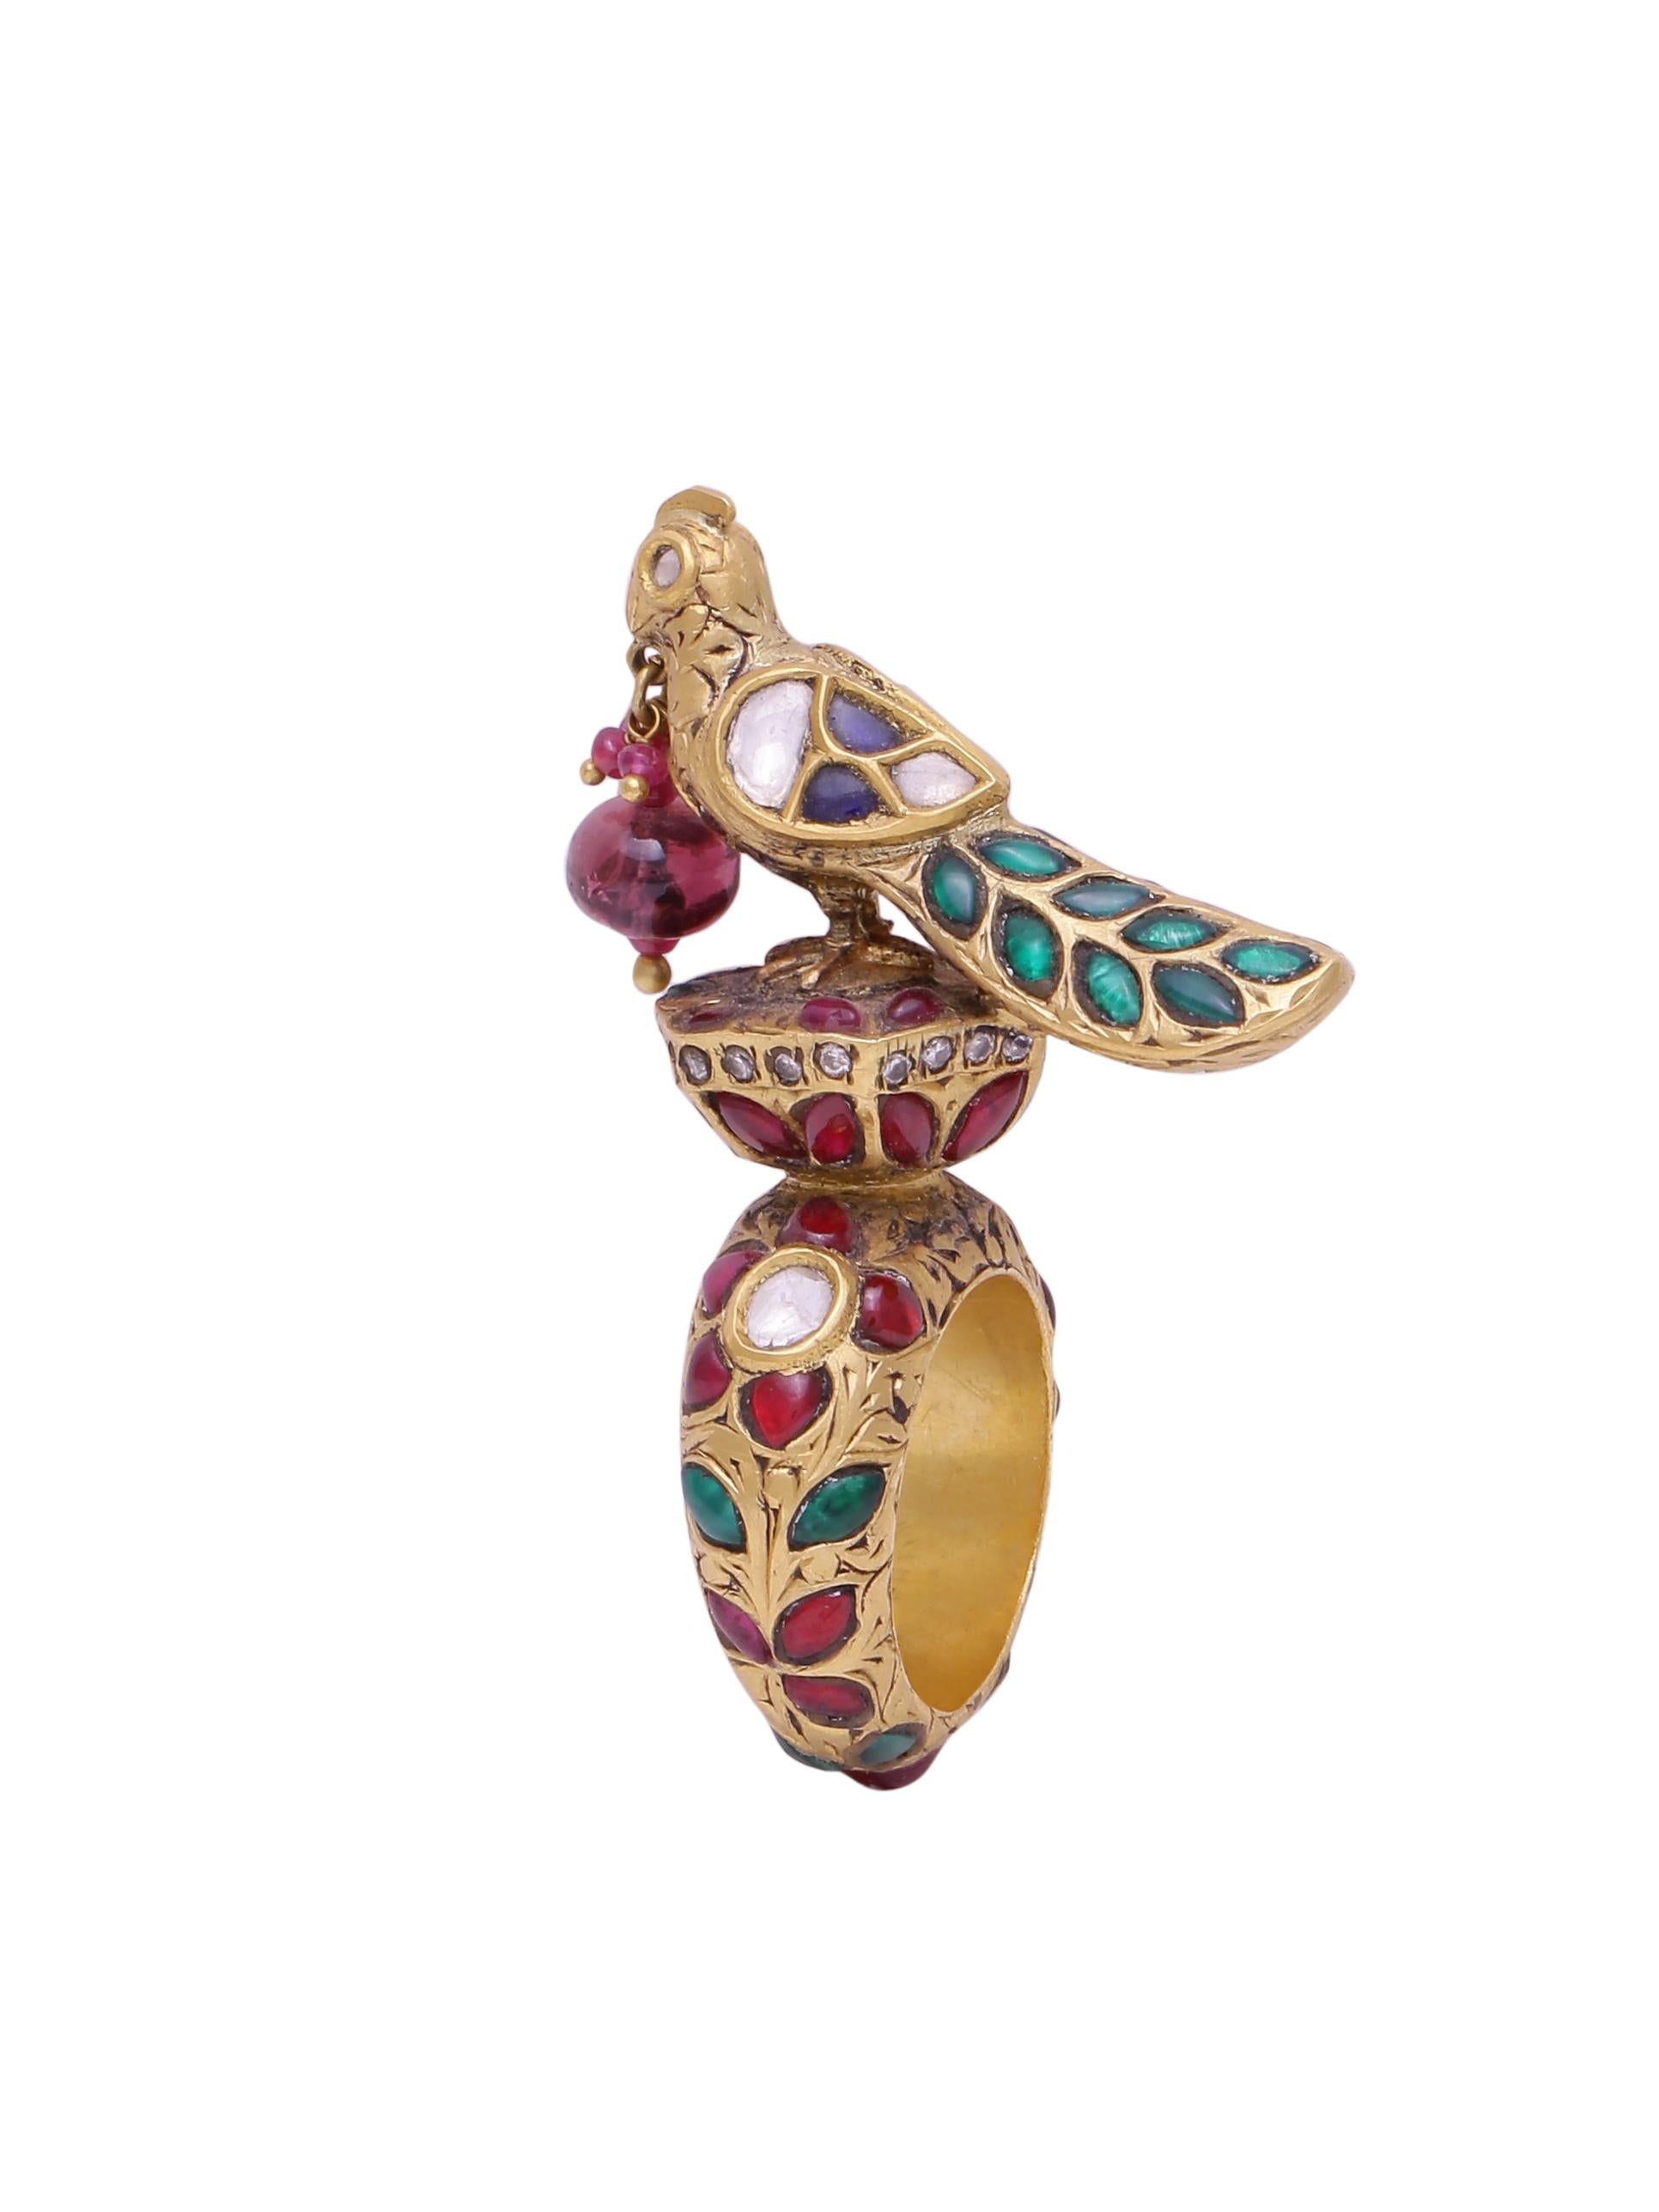 A magnificent Statement ring with a bird covered in diamonds and intricate gold work.
Throughout the ring are gems and diamonds and this very special old Indian work on gold called 